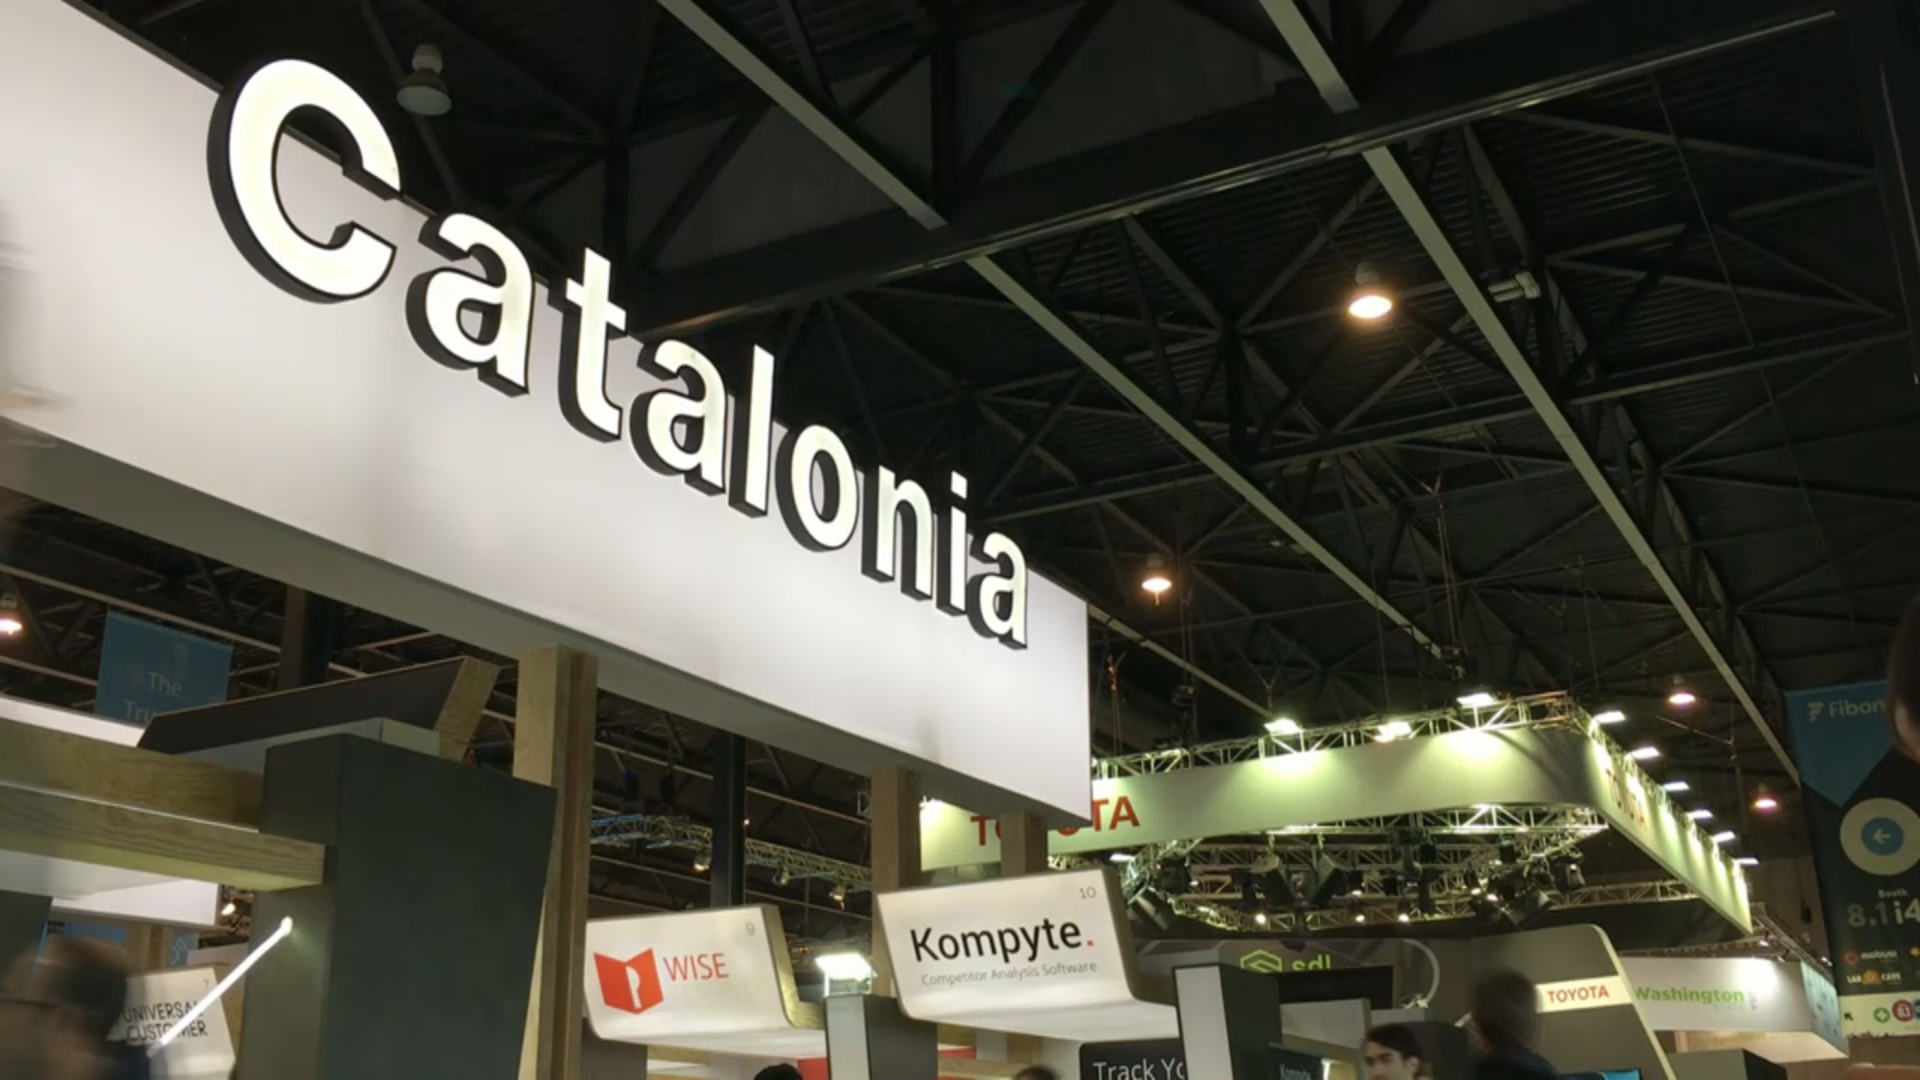 The Catalonia stand at the Mobile World Congress (by ACN)